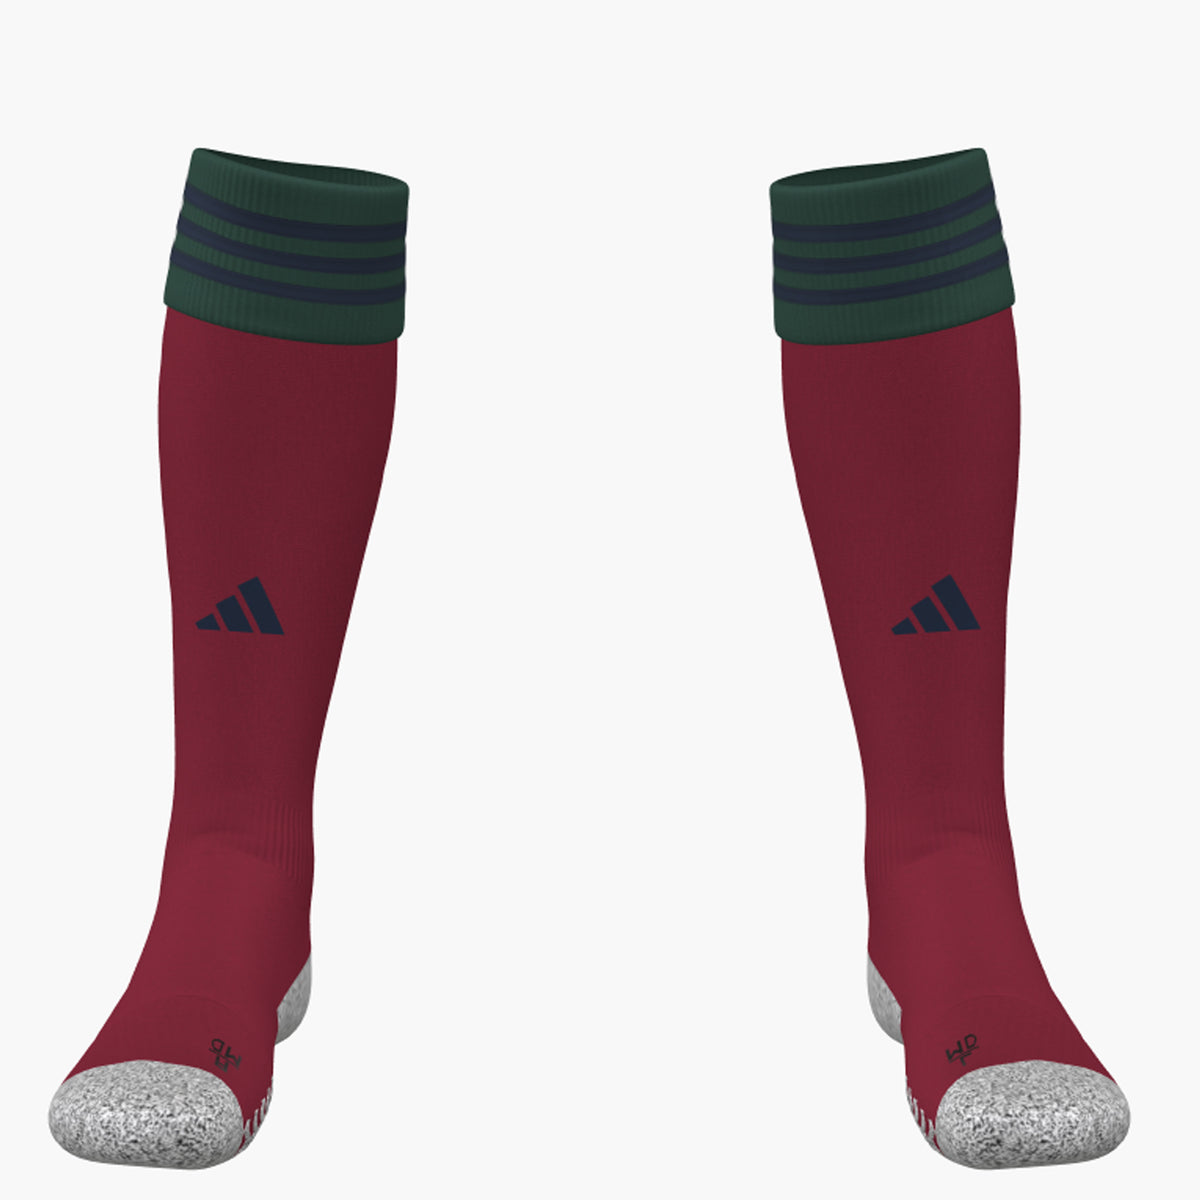 Tulse Hill and Dulwich HC Home Socks